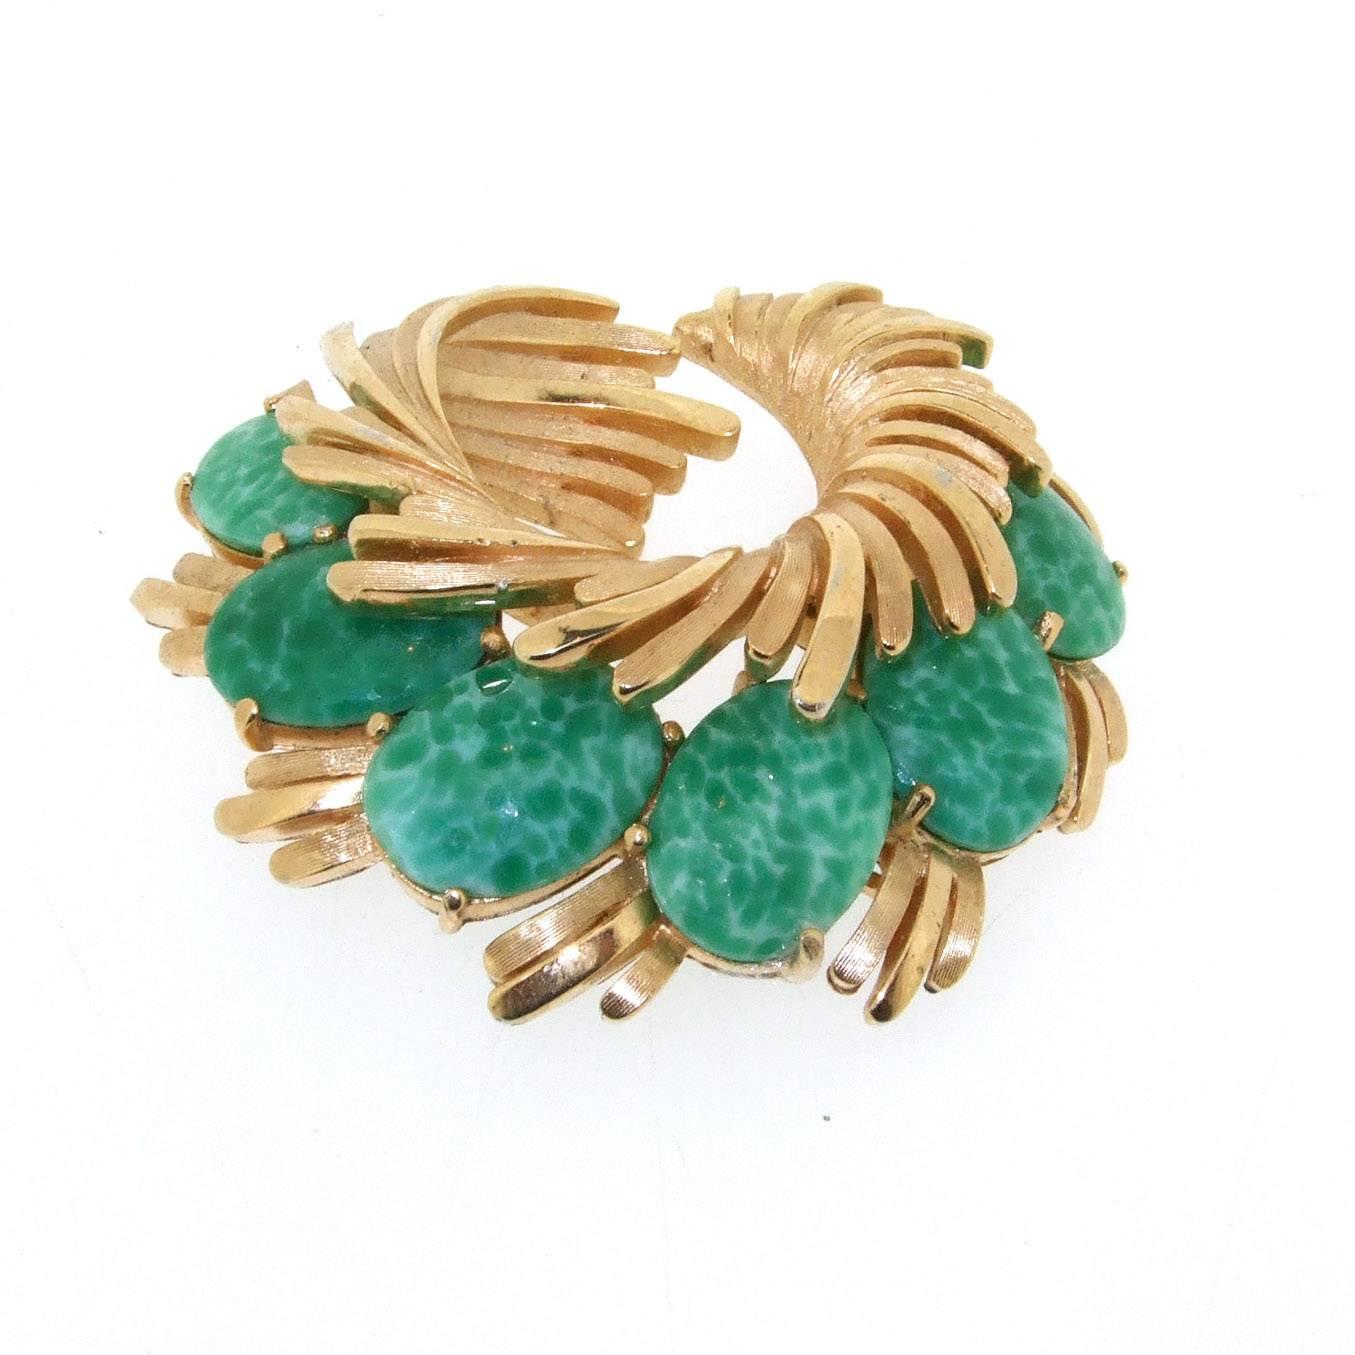 A vintage brooch by Trifari, USA dating from the 1970s set with beautiful green glass that emulates Jade. 